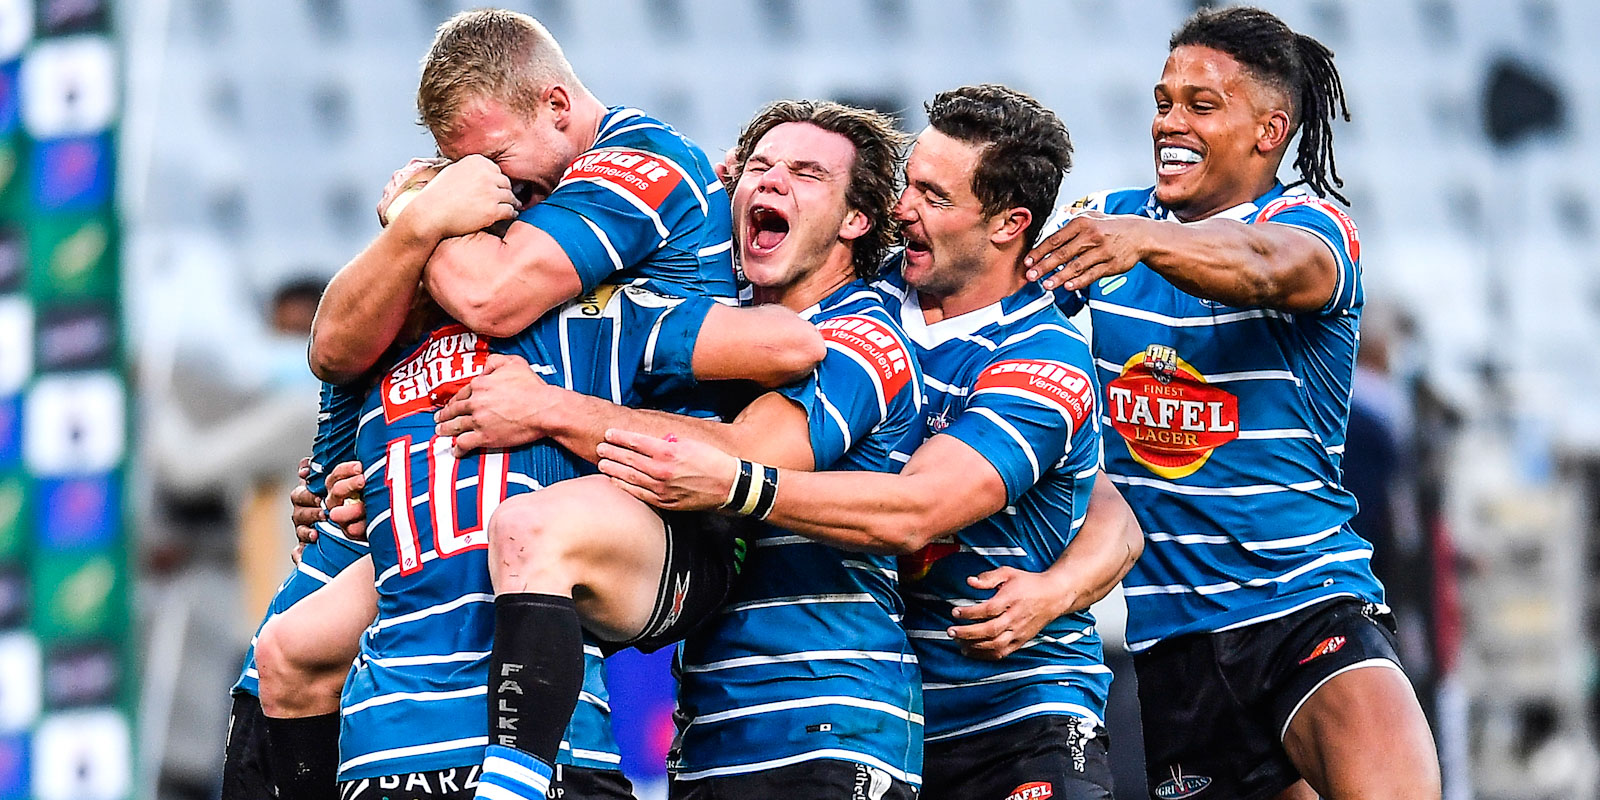 Windhoek Draught Griquas celebrate after beating DHL WP in Cape Town last season.